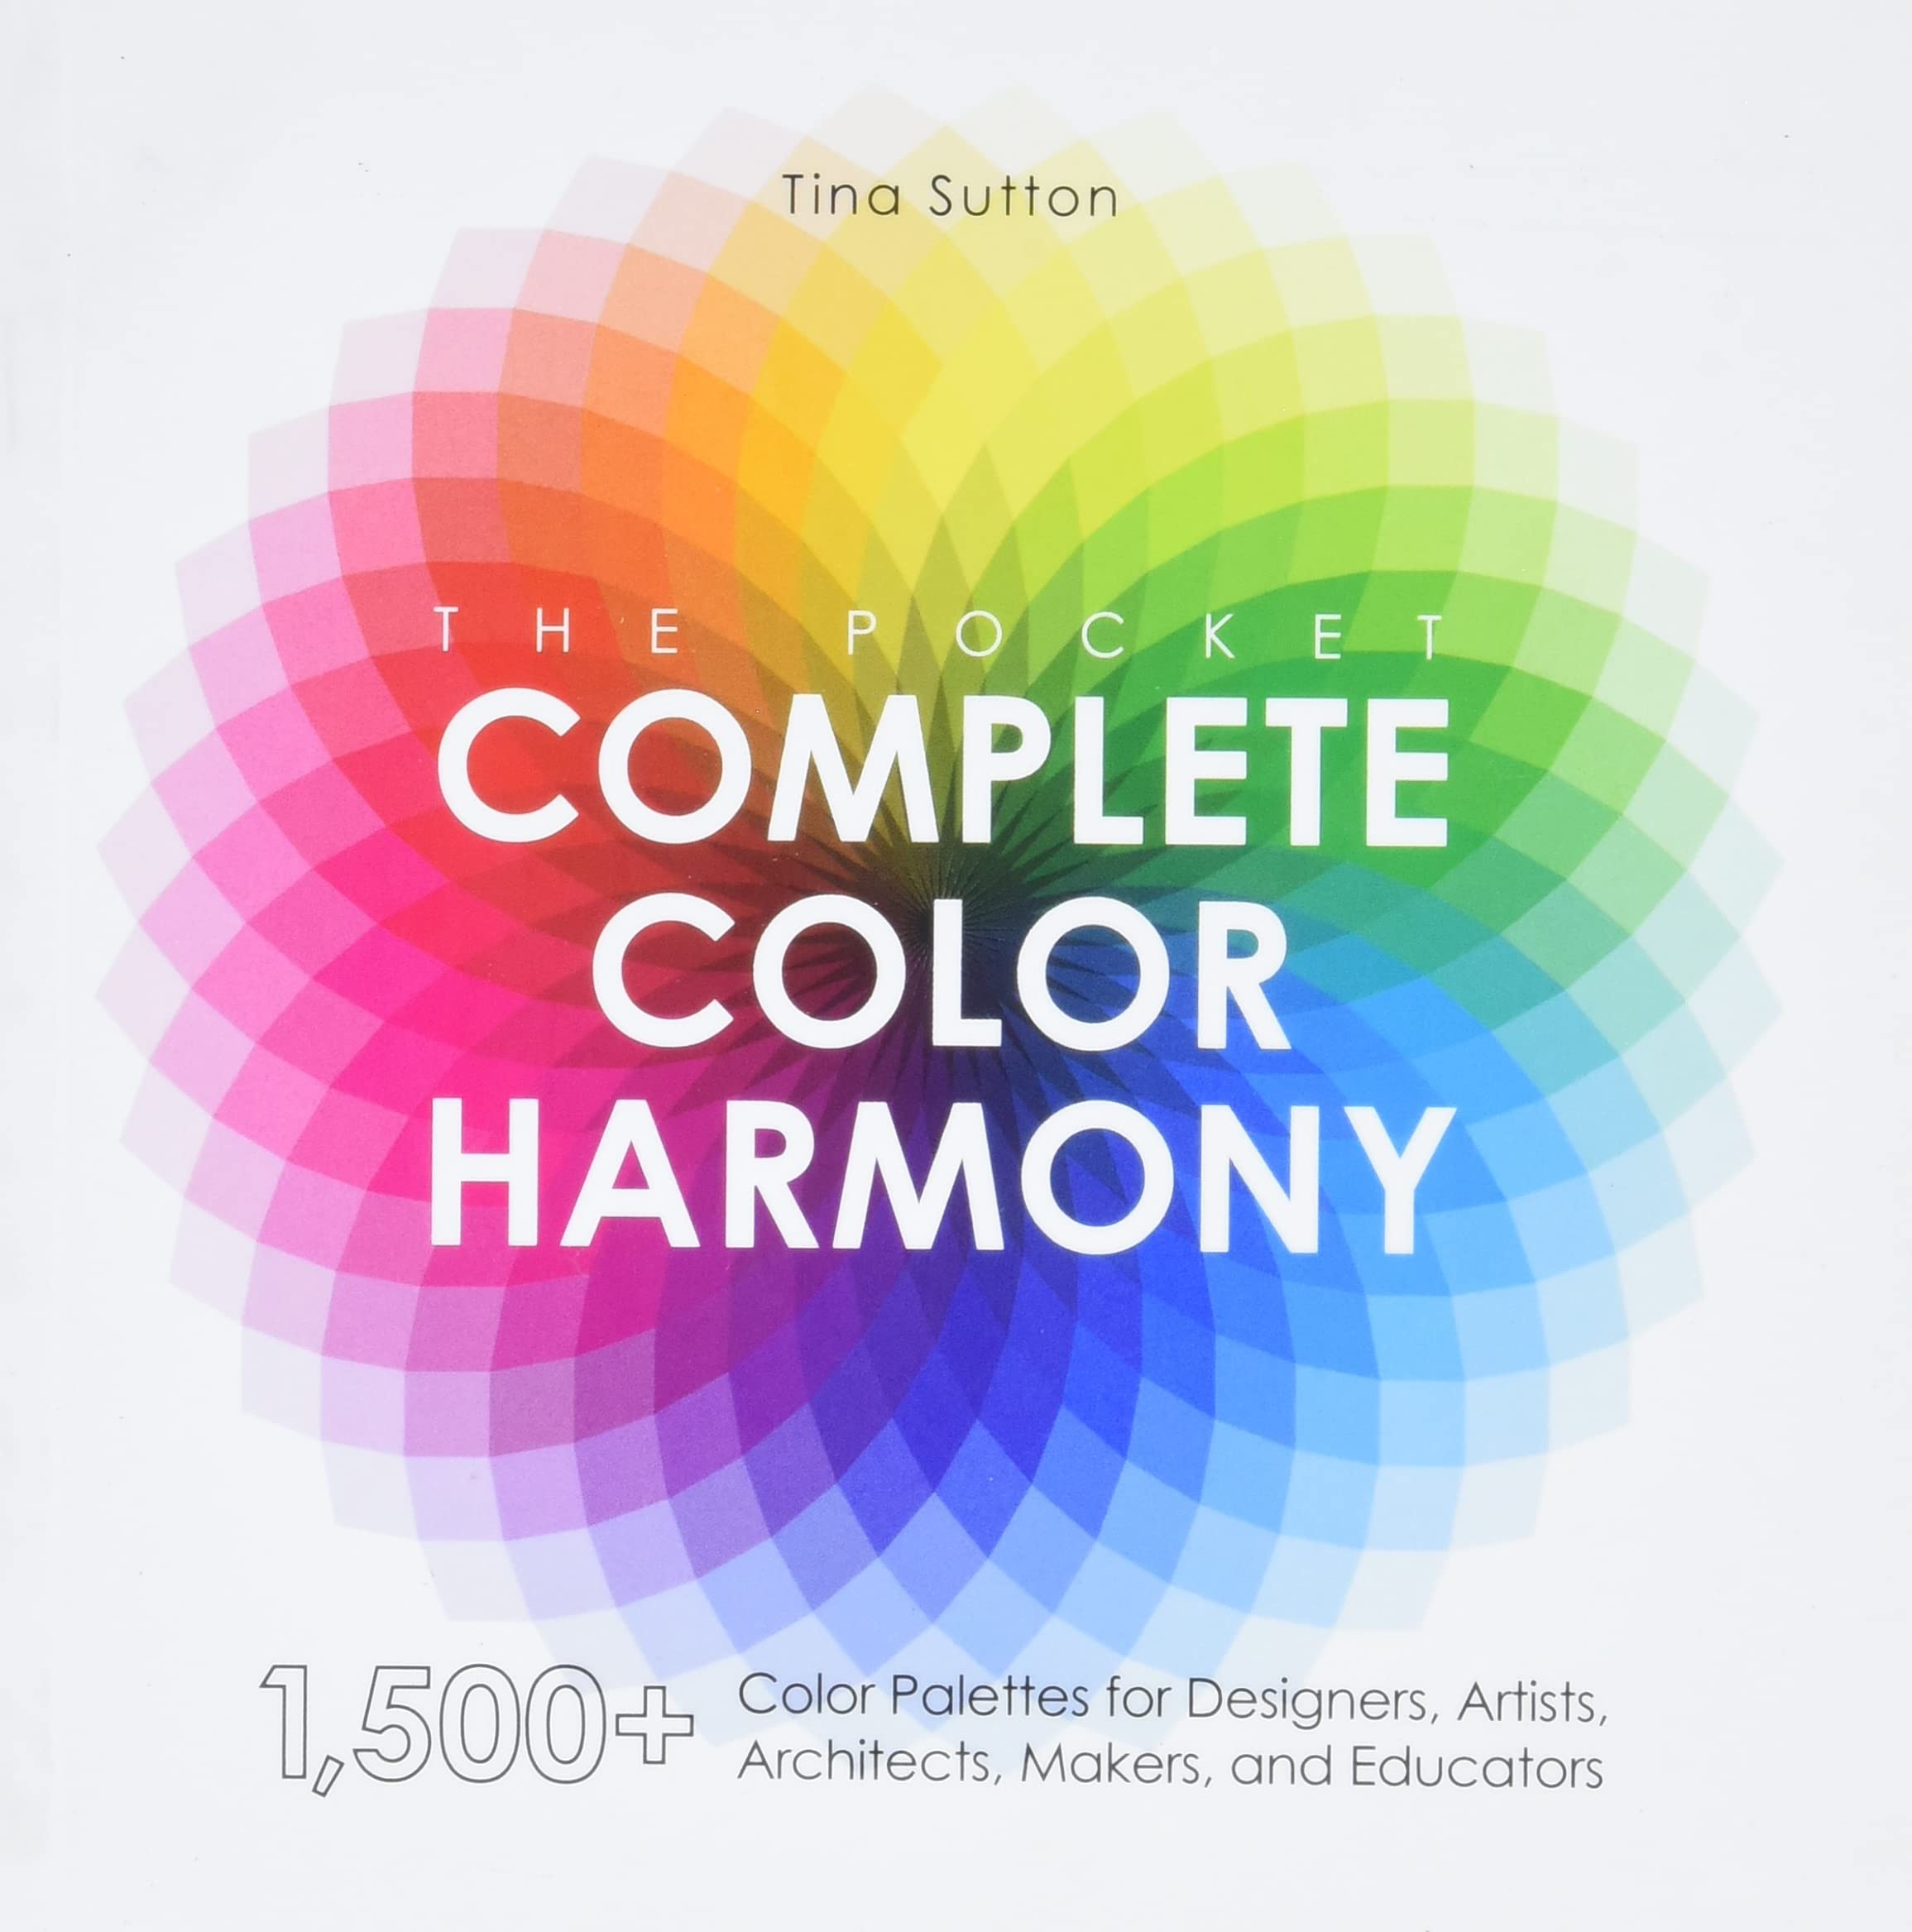 The Pocket Complete Color Harmony: 1,500 Plus Color Palettes for Designers, Artists, Architects, Makers, and Educators